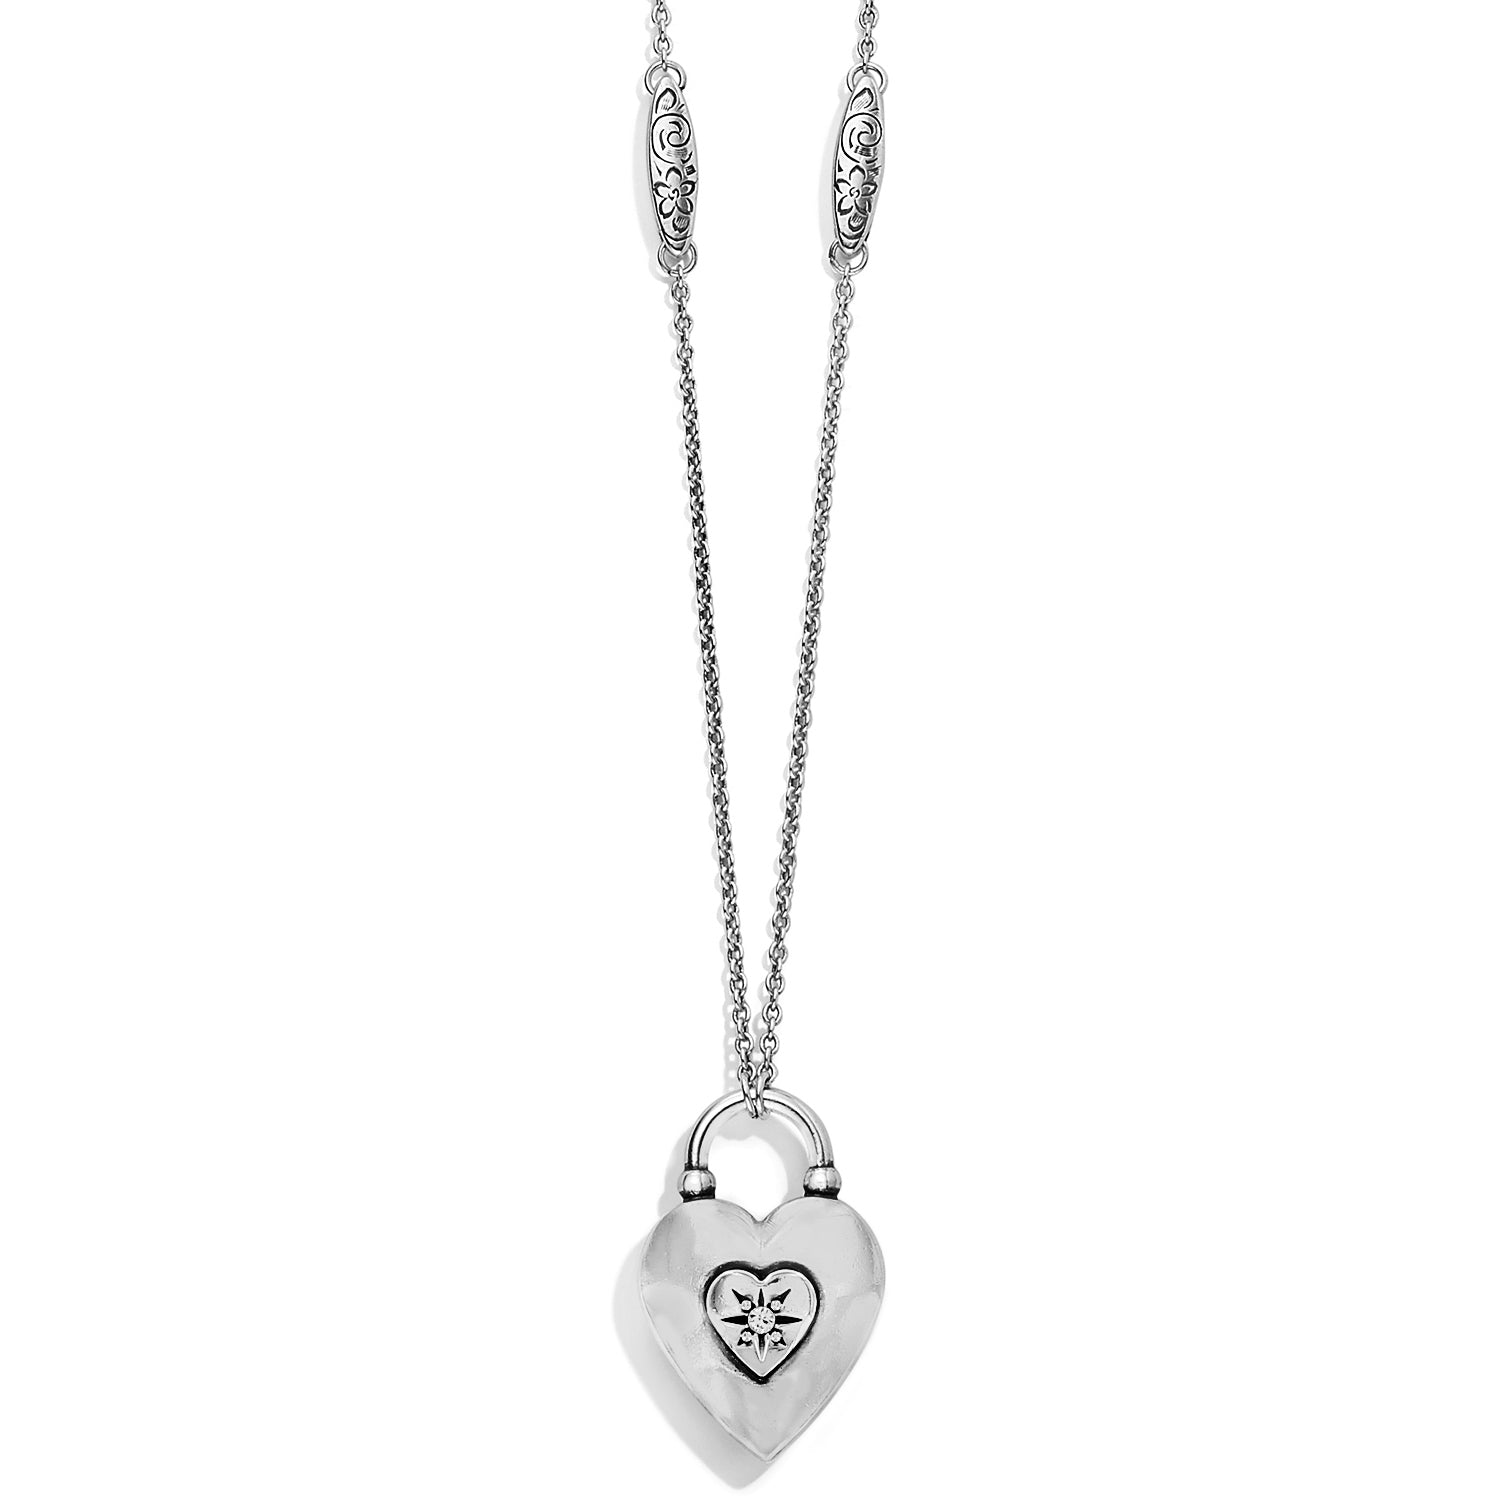 One Heart Long Necklace